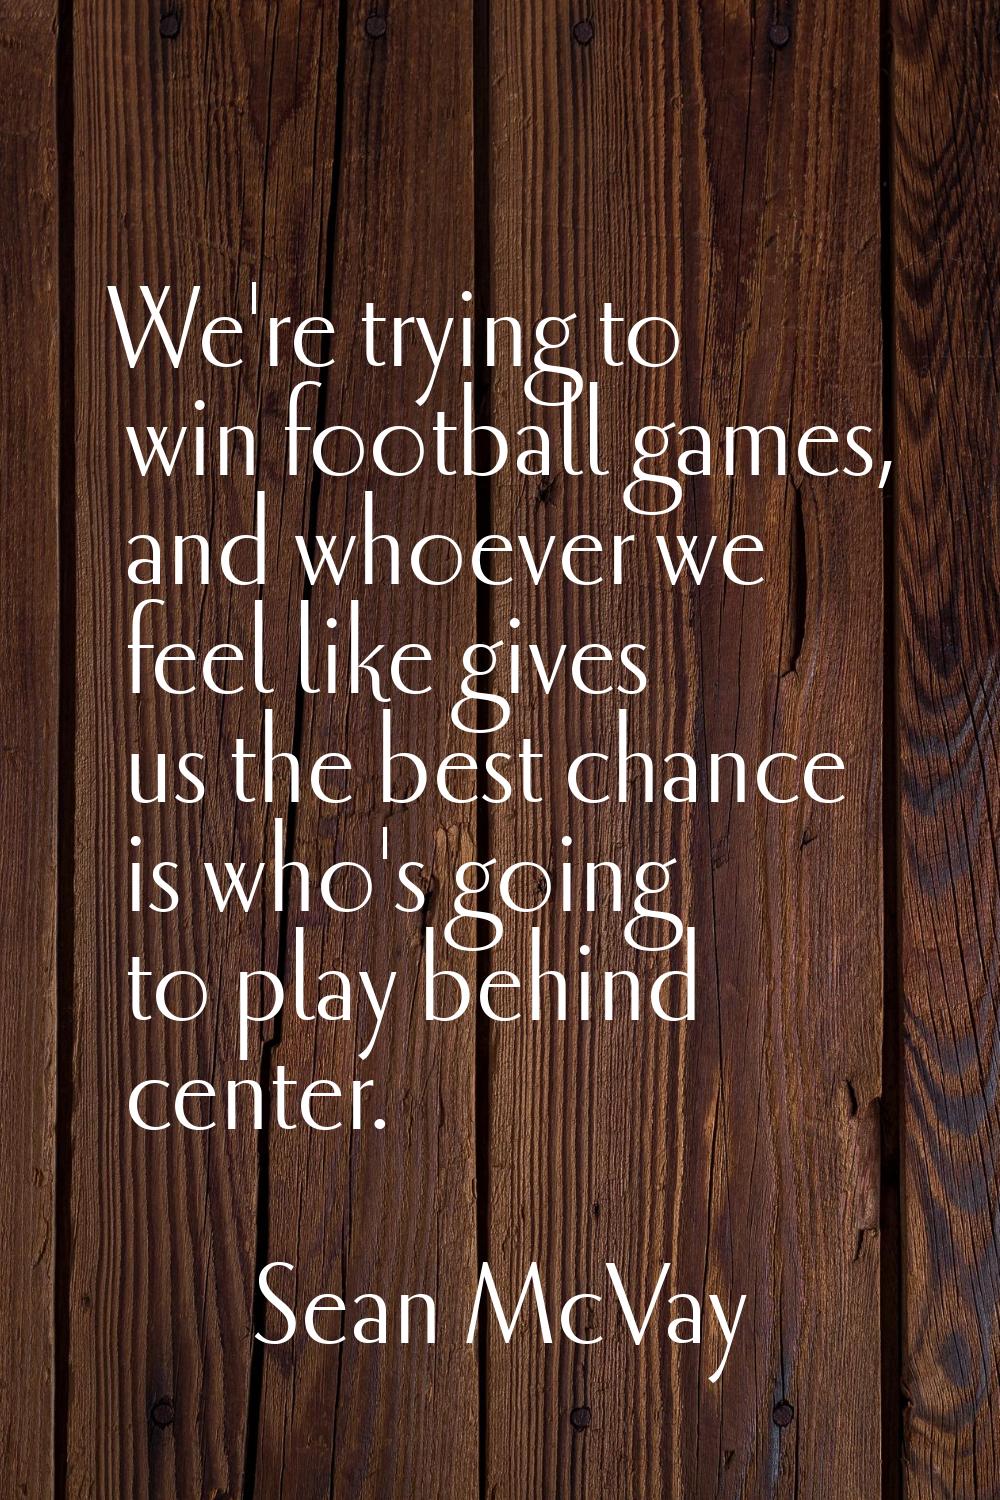 We're trying to win football games, and whoever we feel like gives us the best chance is who's goin